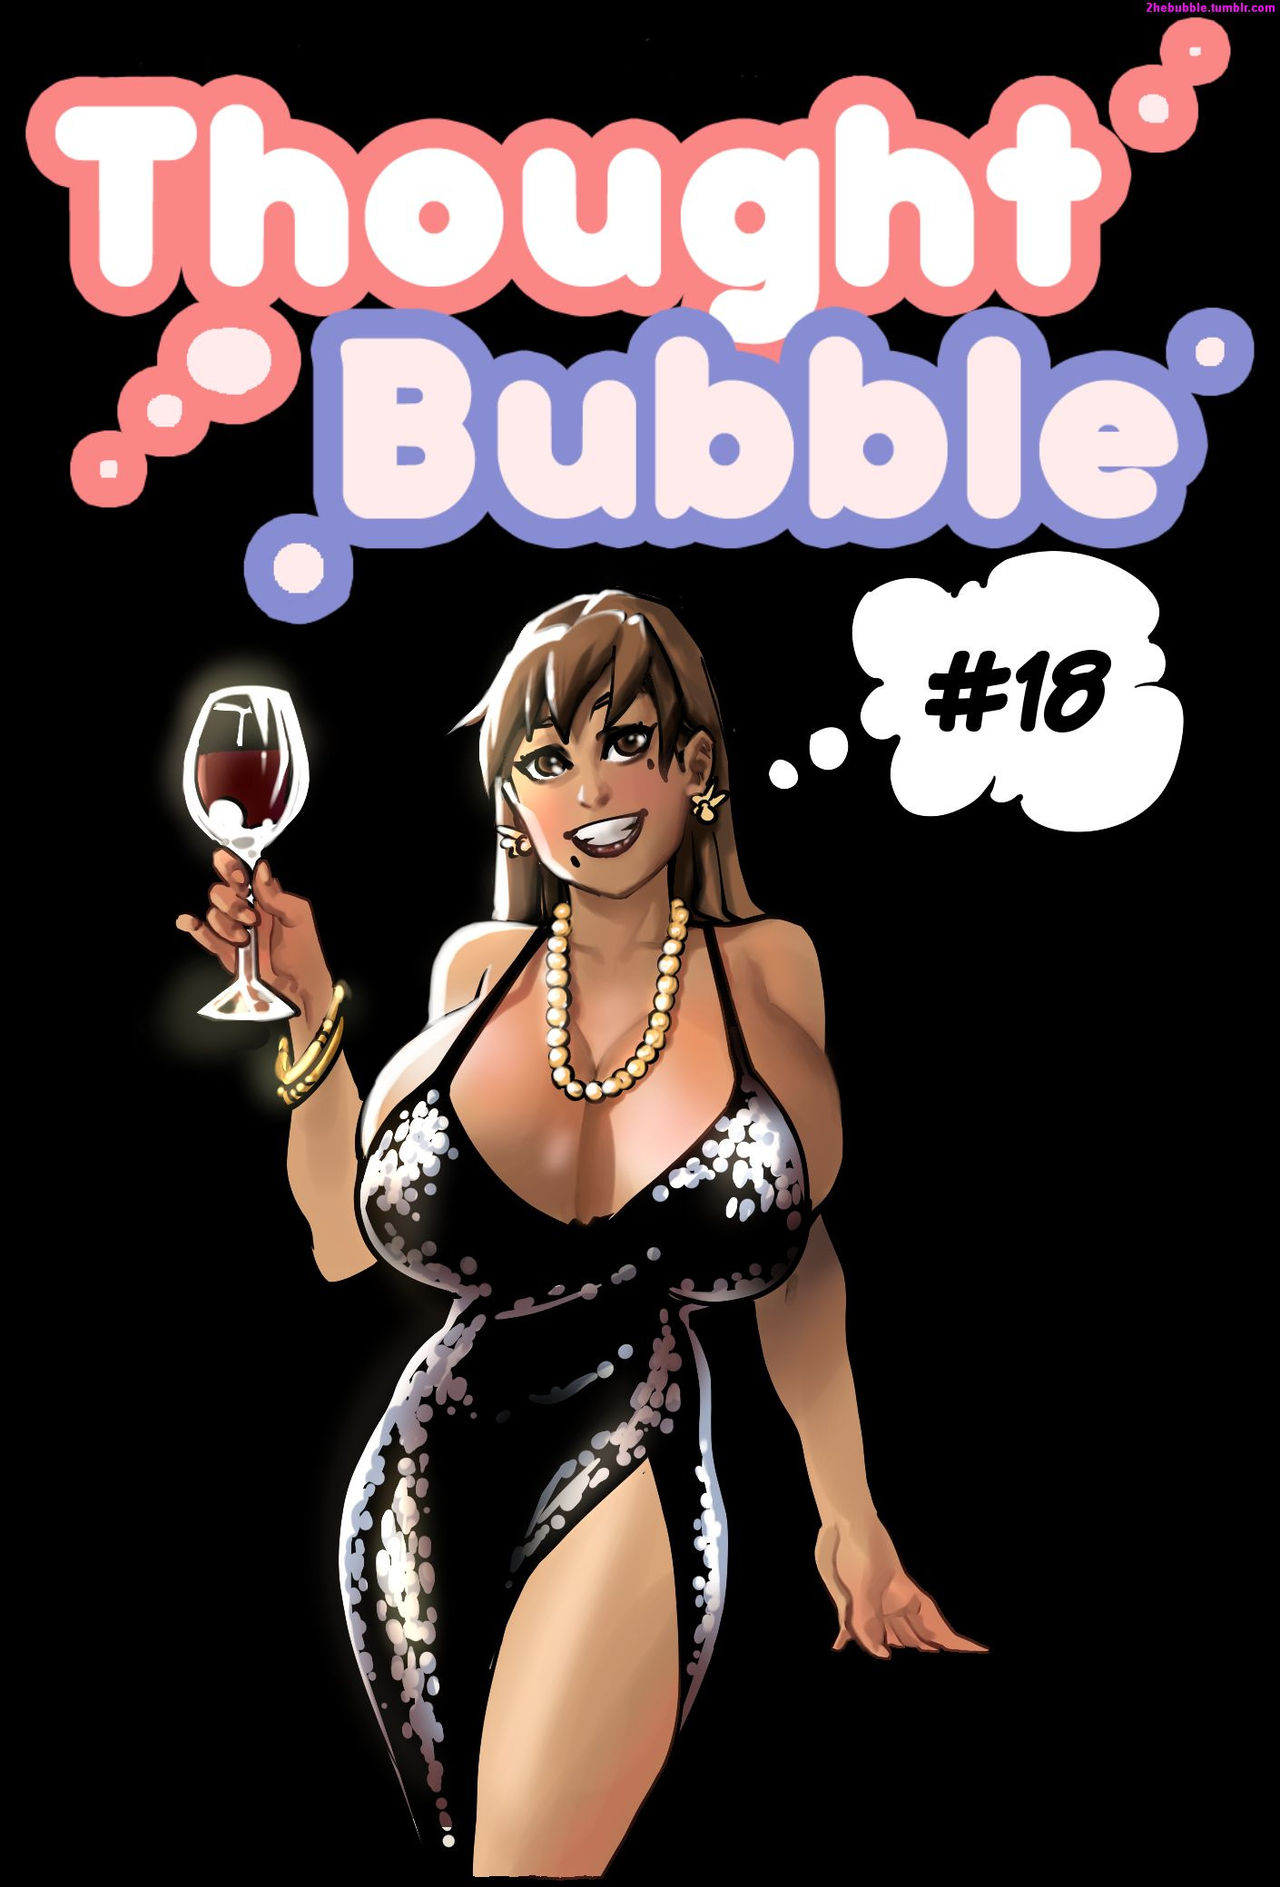 Bubble - Sidneymt - Thought Bubble #18, Big Boobs â€¢ Free Porn Comics